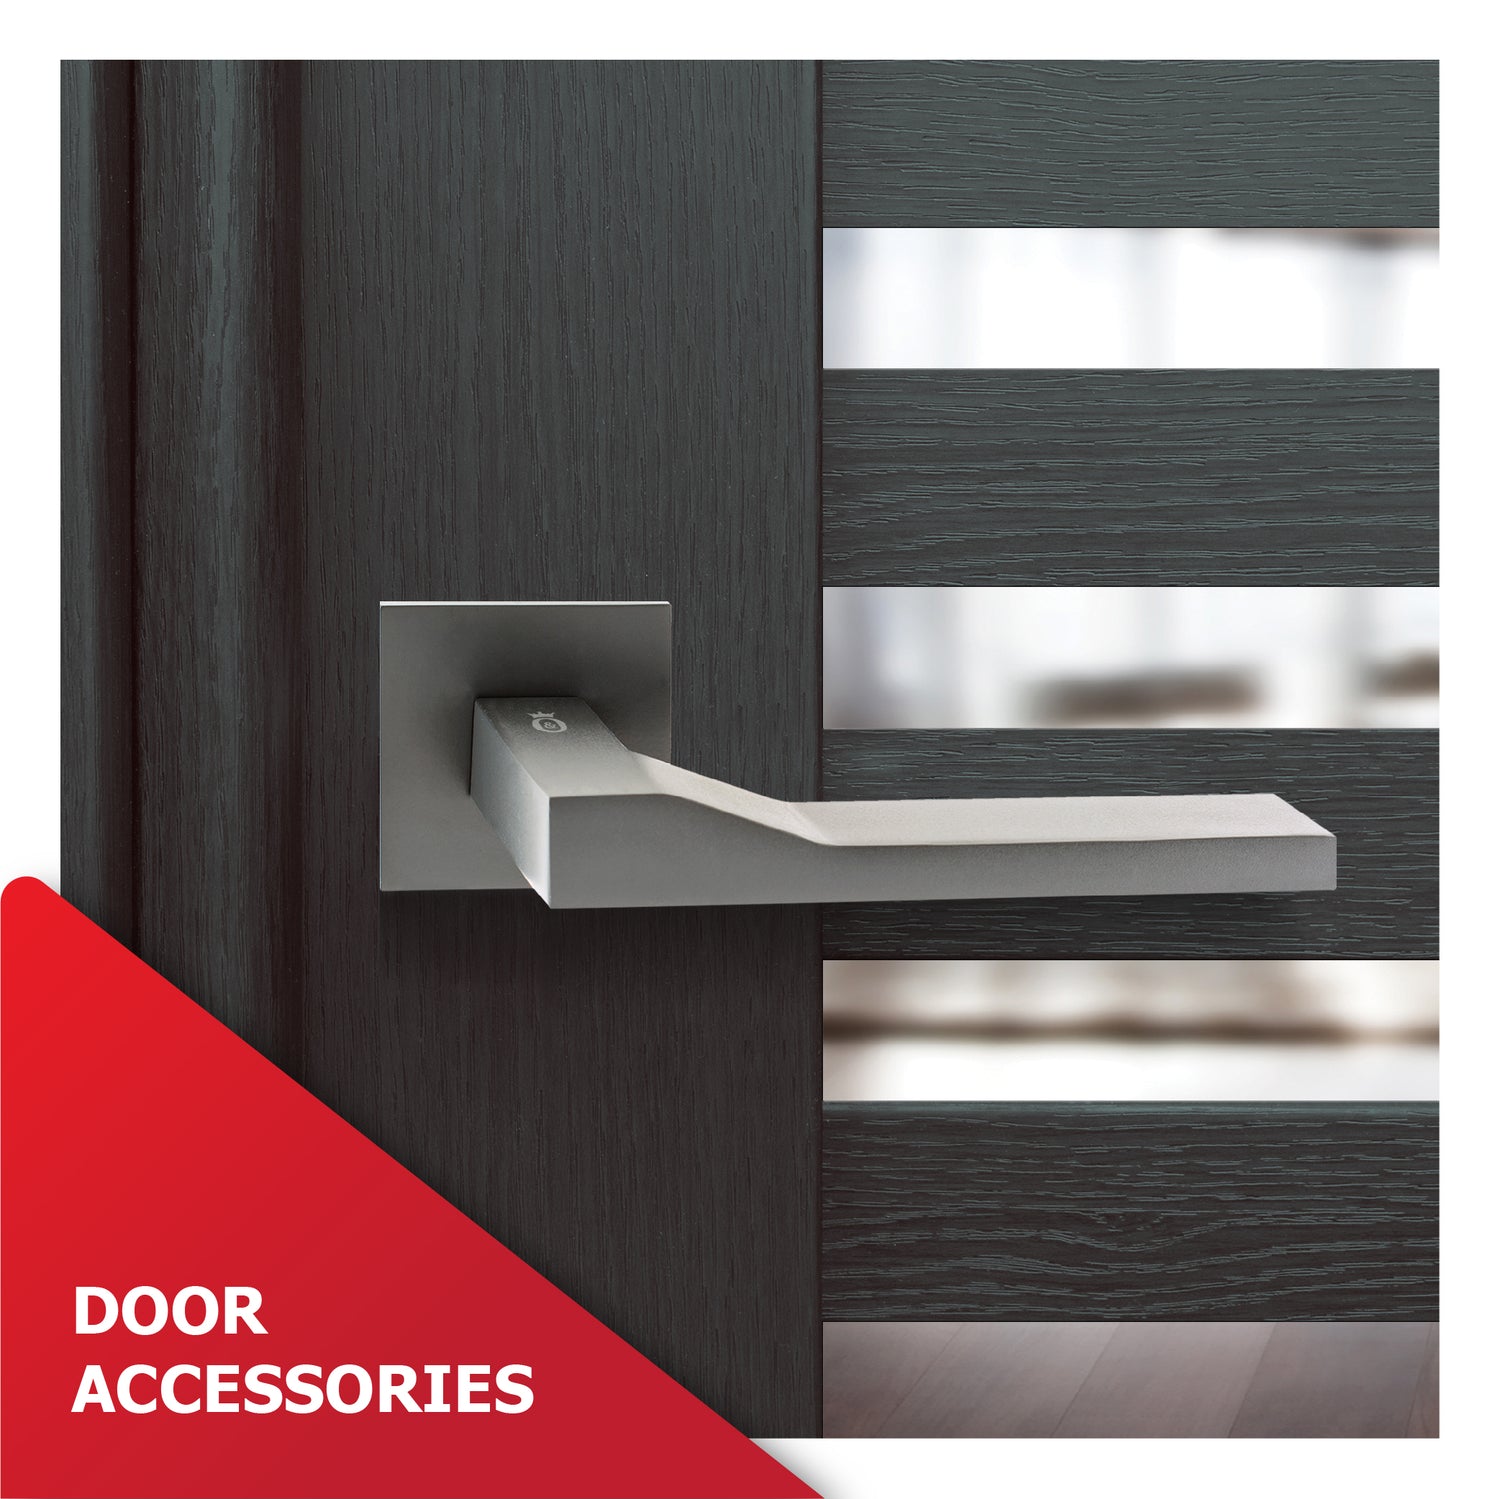 Door accessories collection featuring hinges, handles, locks, and bolts by M. M. Noorbhoy & Co.